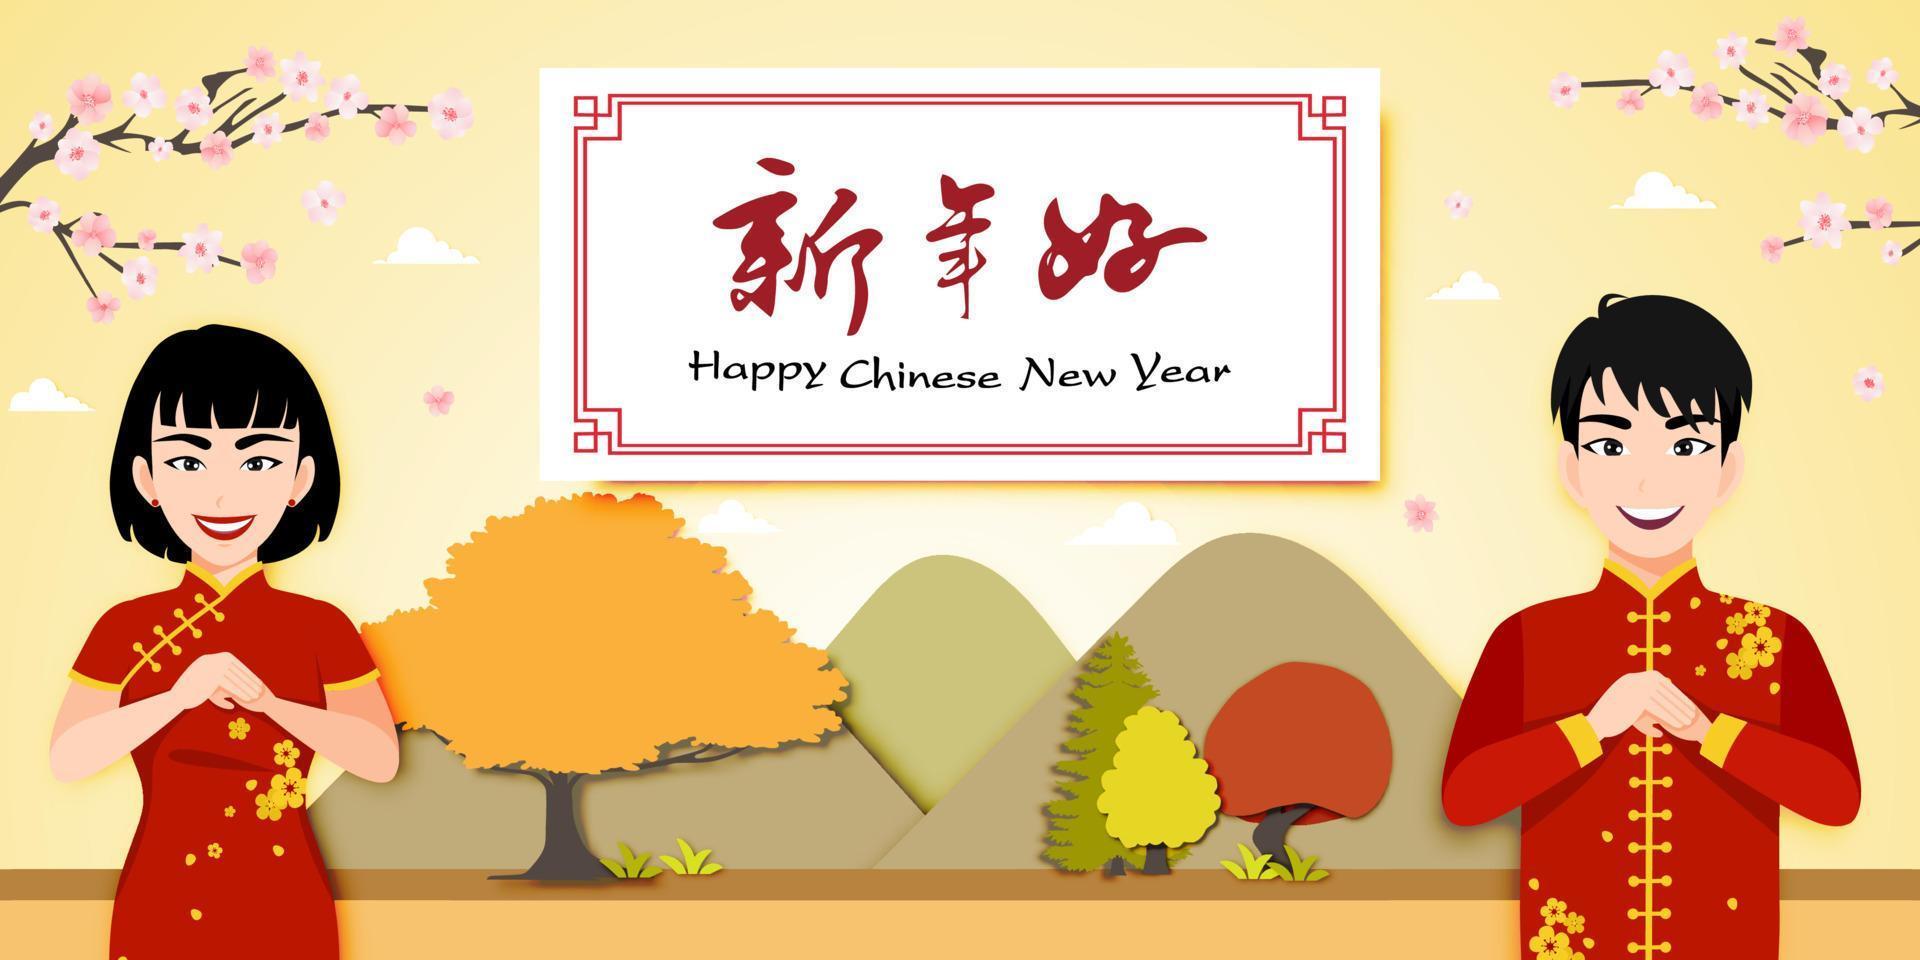 Chinese boy and girl cartoon character greeting in Chinese new year festival on plum blossom flower and nature background vector